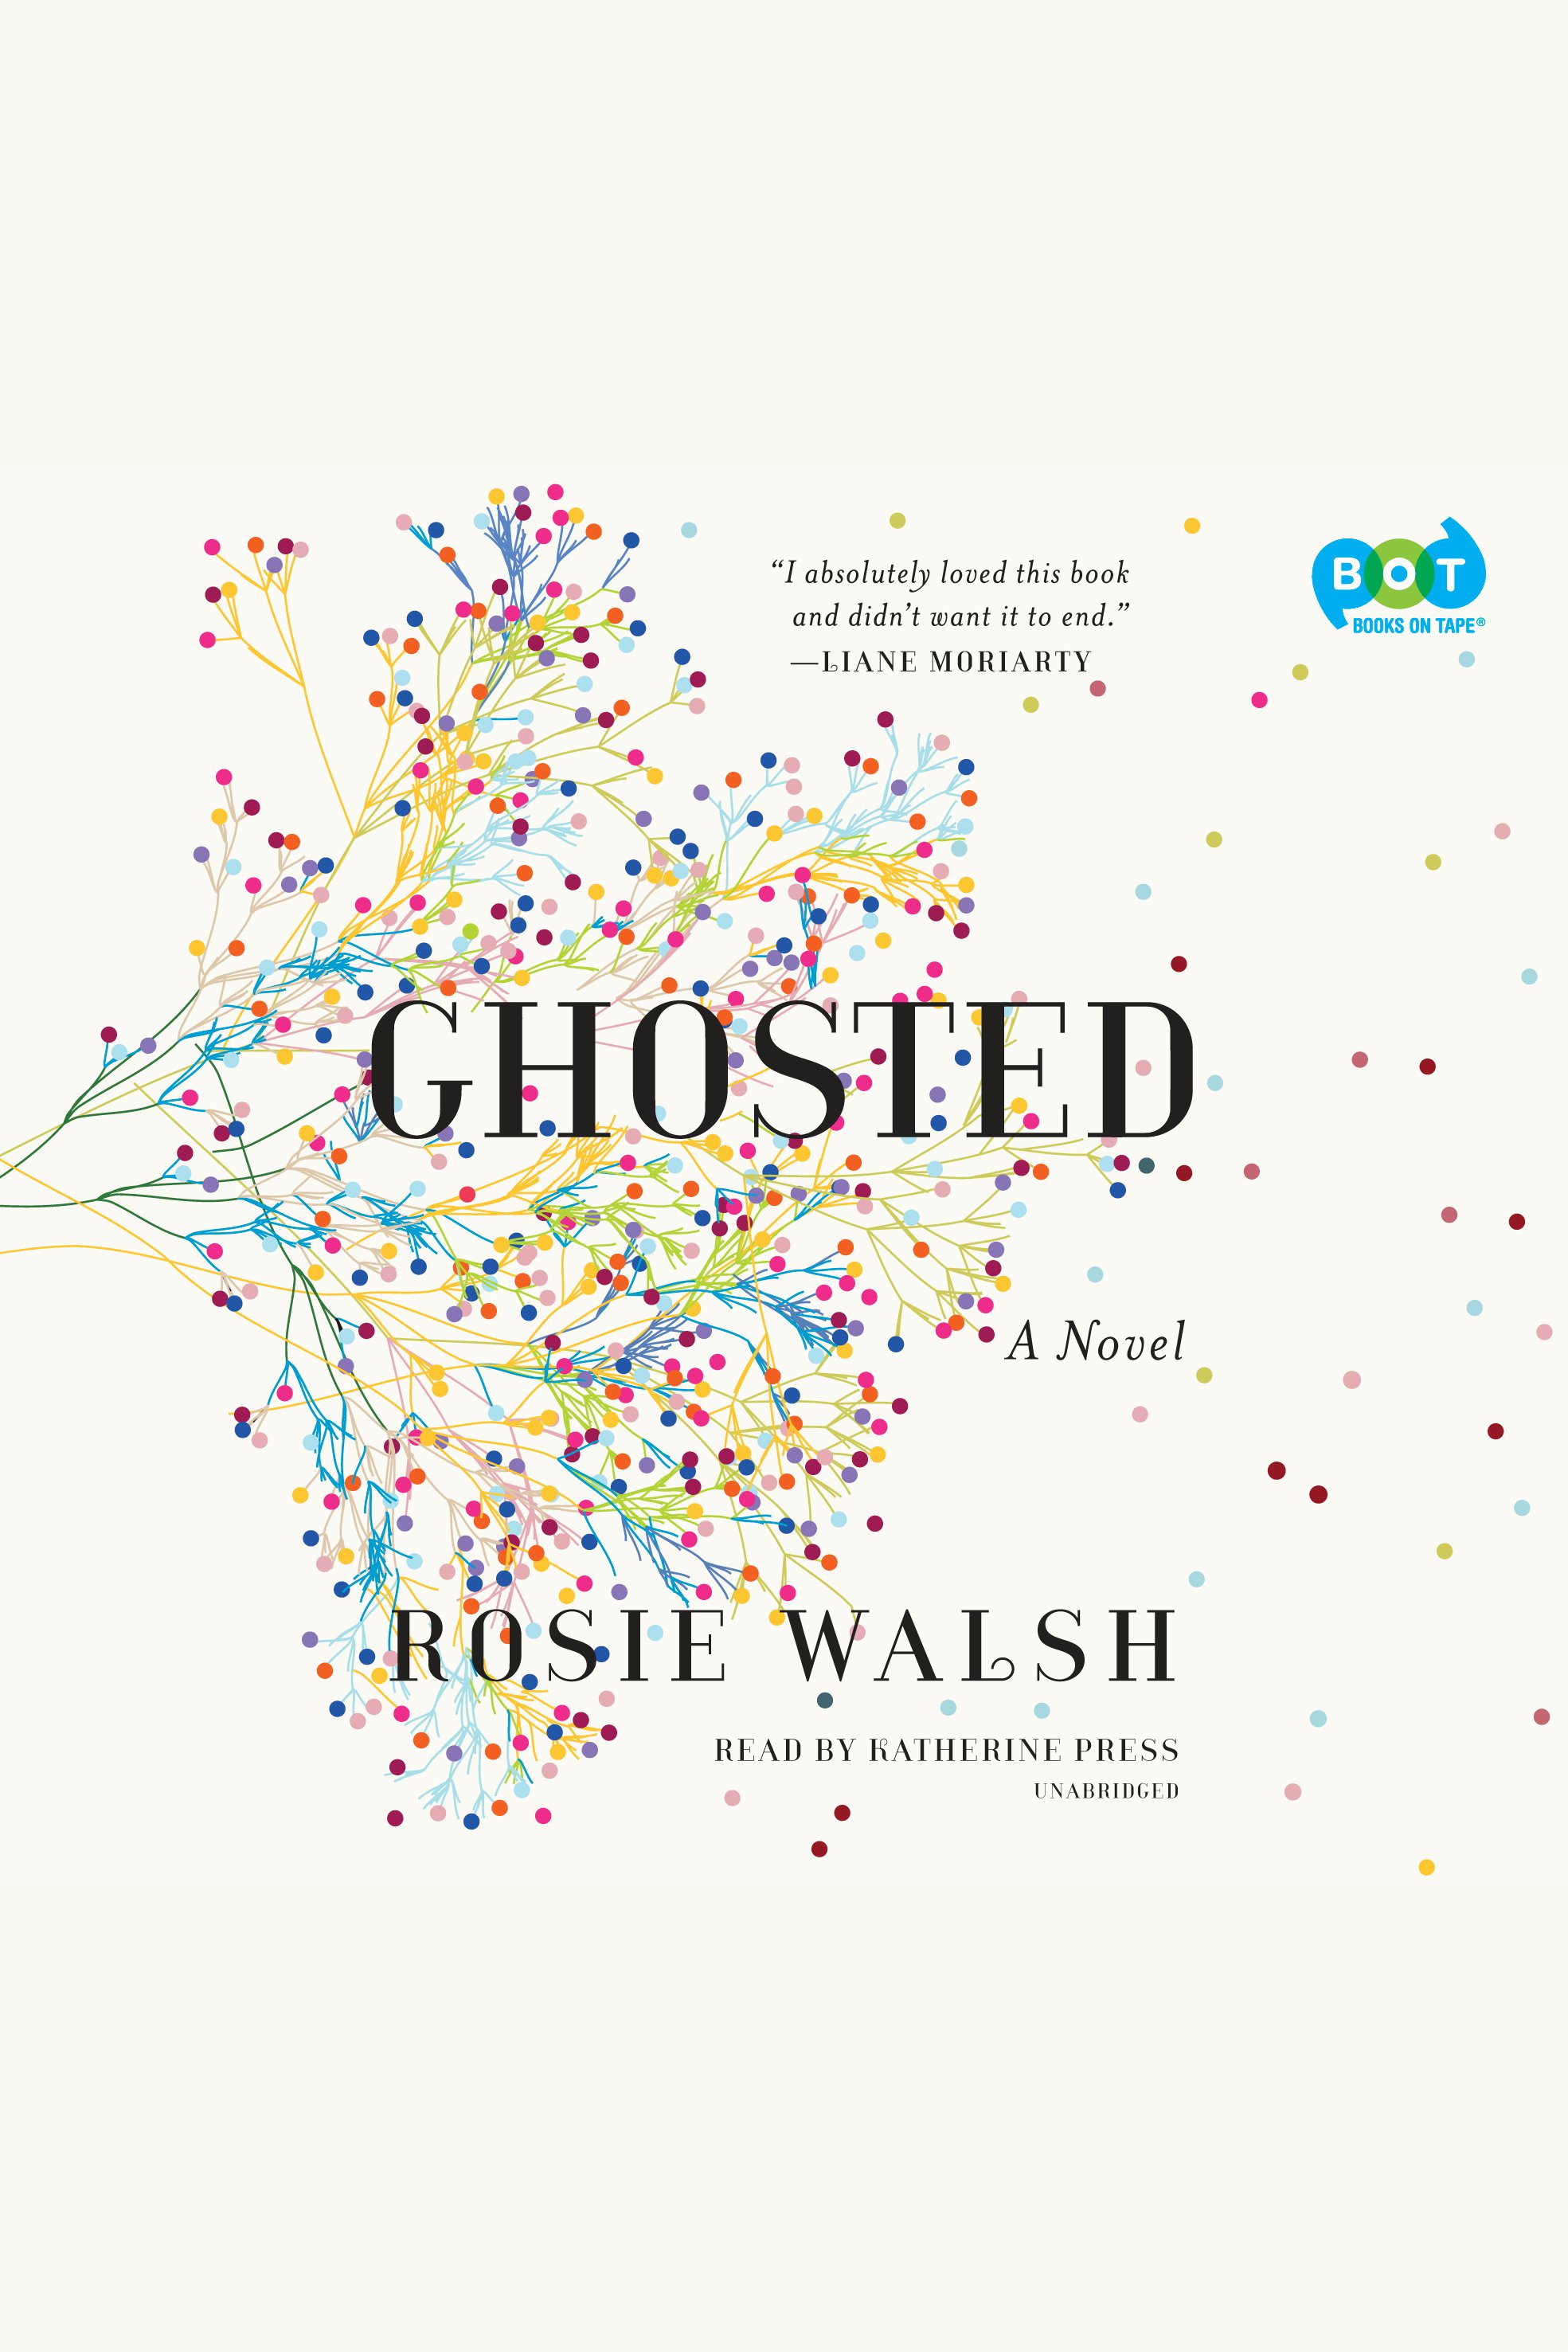 Ghosted cover image